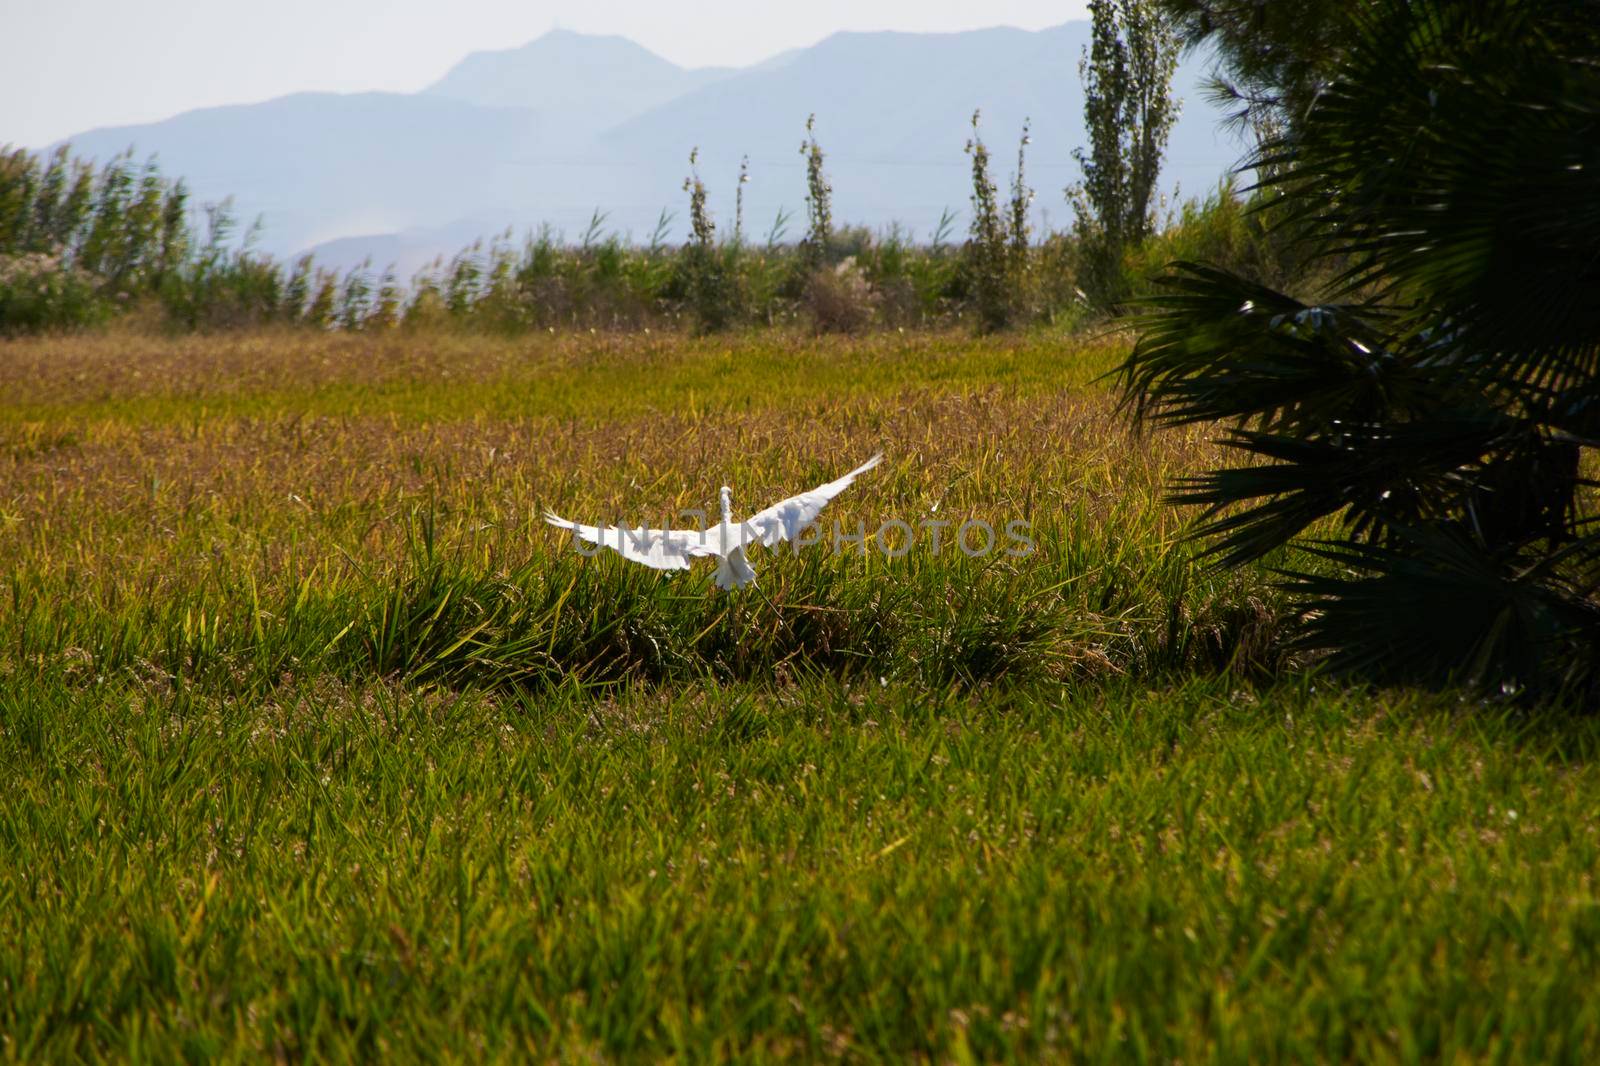 Heron starting to fly over rice fields, green, sunny, from the back